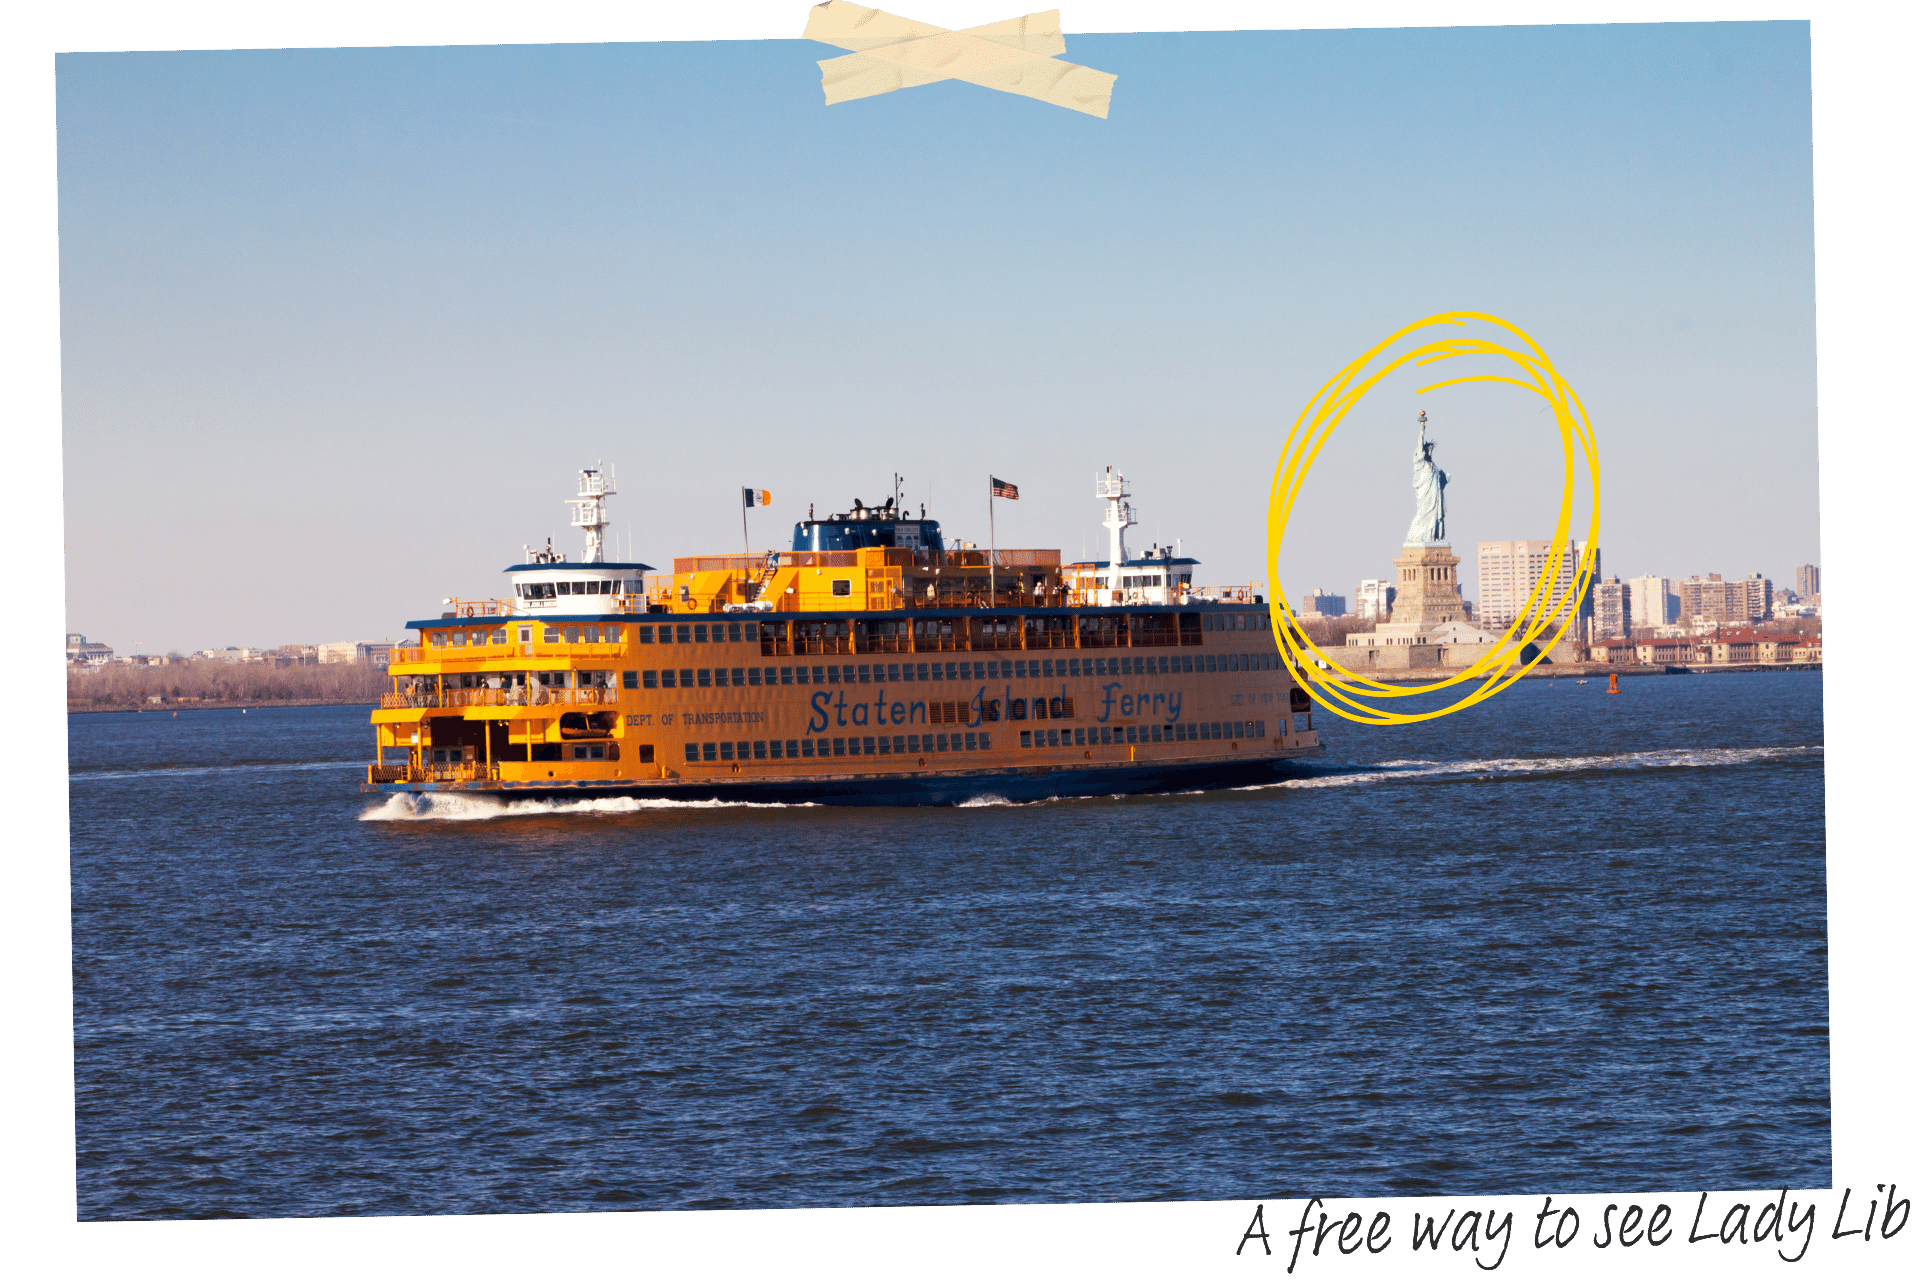 The Staten Island Ferry crosses the water, with the Statue of Liberty, circled in yellow, in the background. The Staten Island Ferry is one of the free things to do in New York